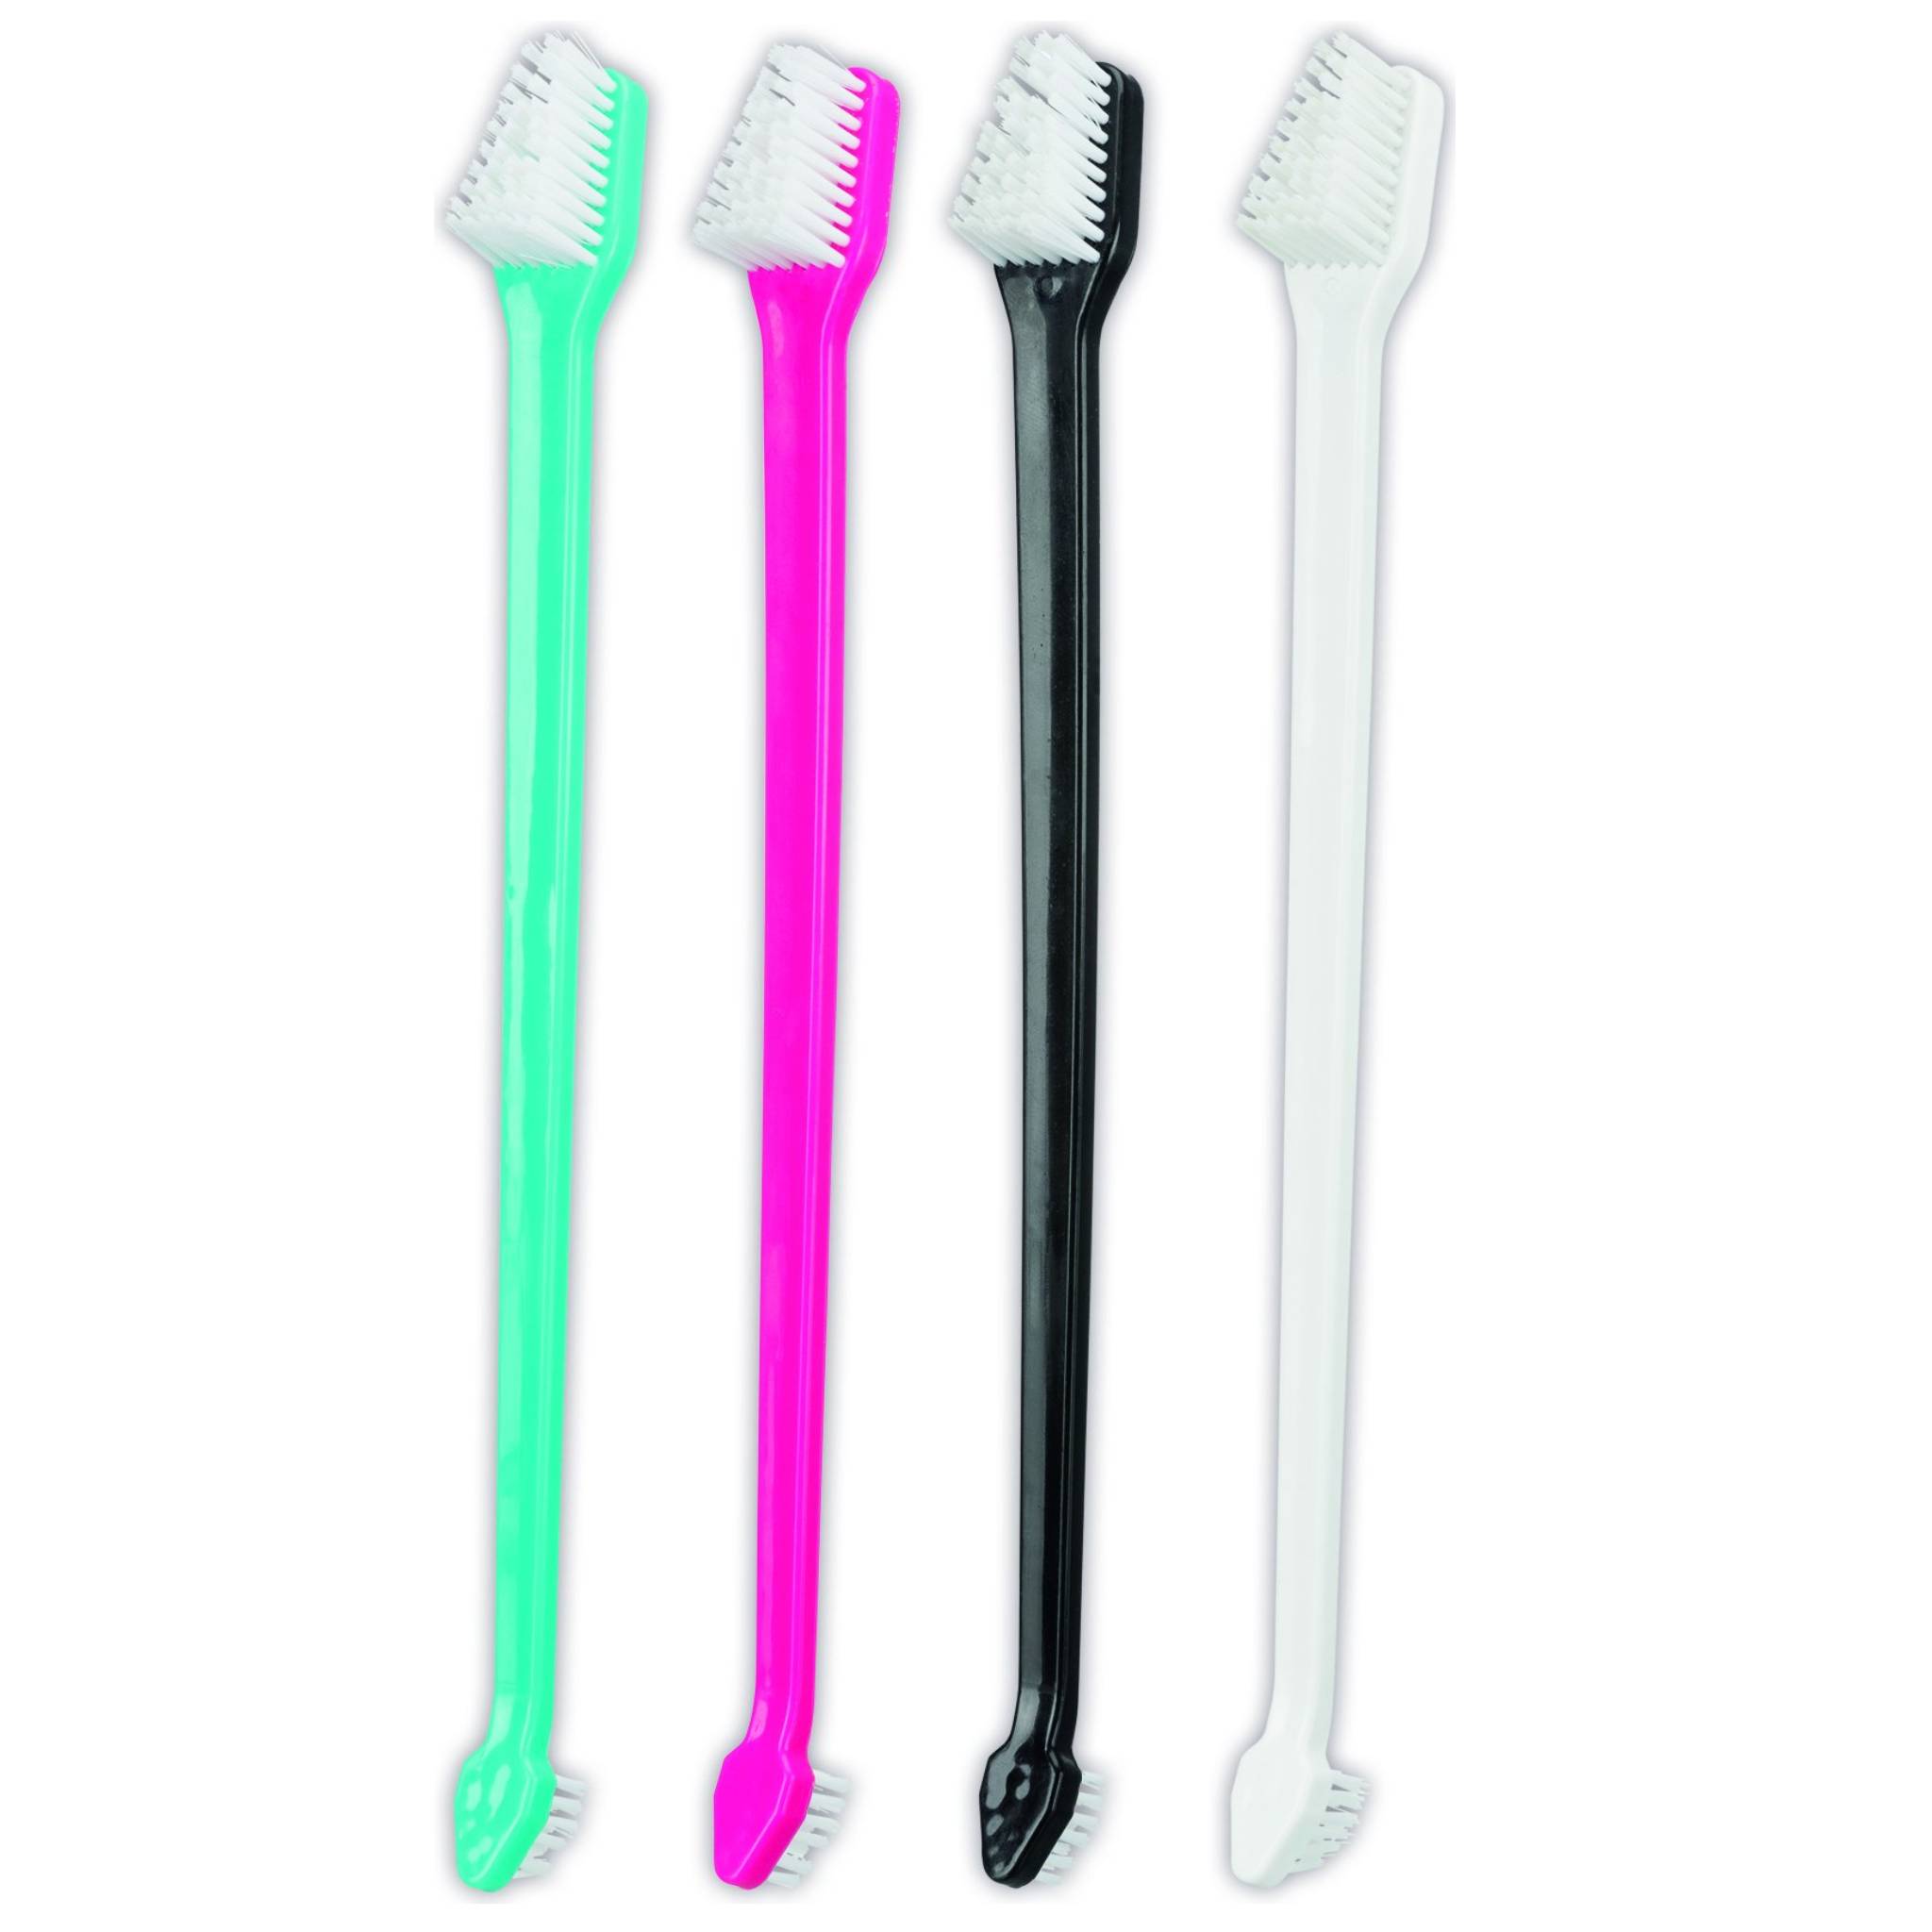 Trixie Toothbrush Set for Dogs/Cats - Pack of 2